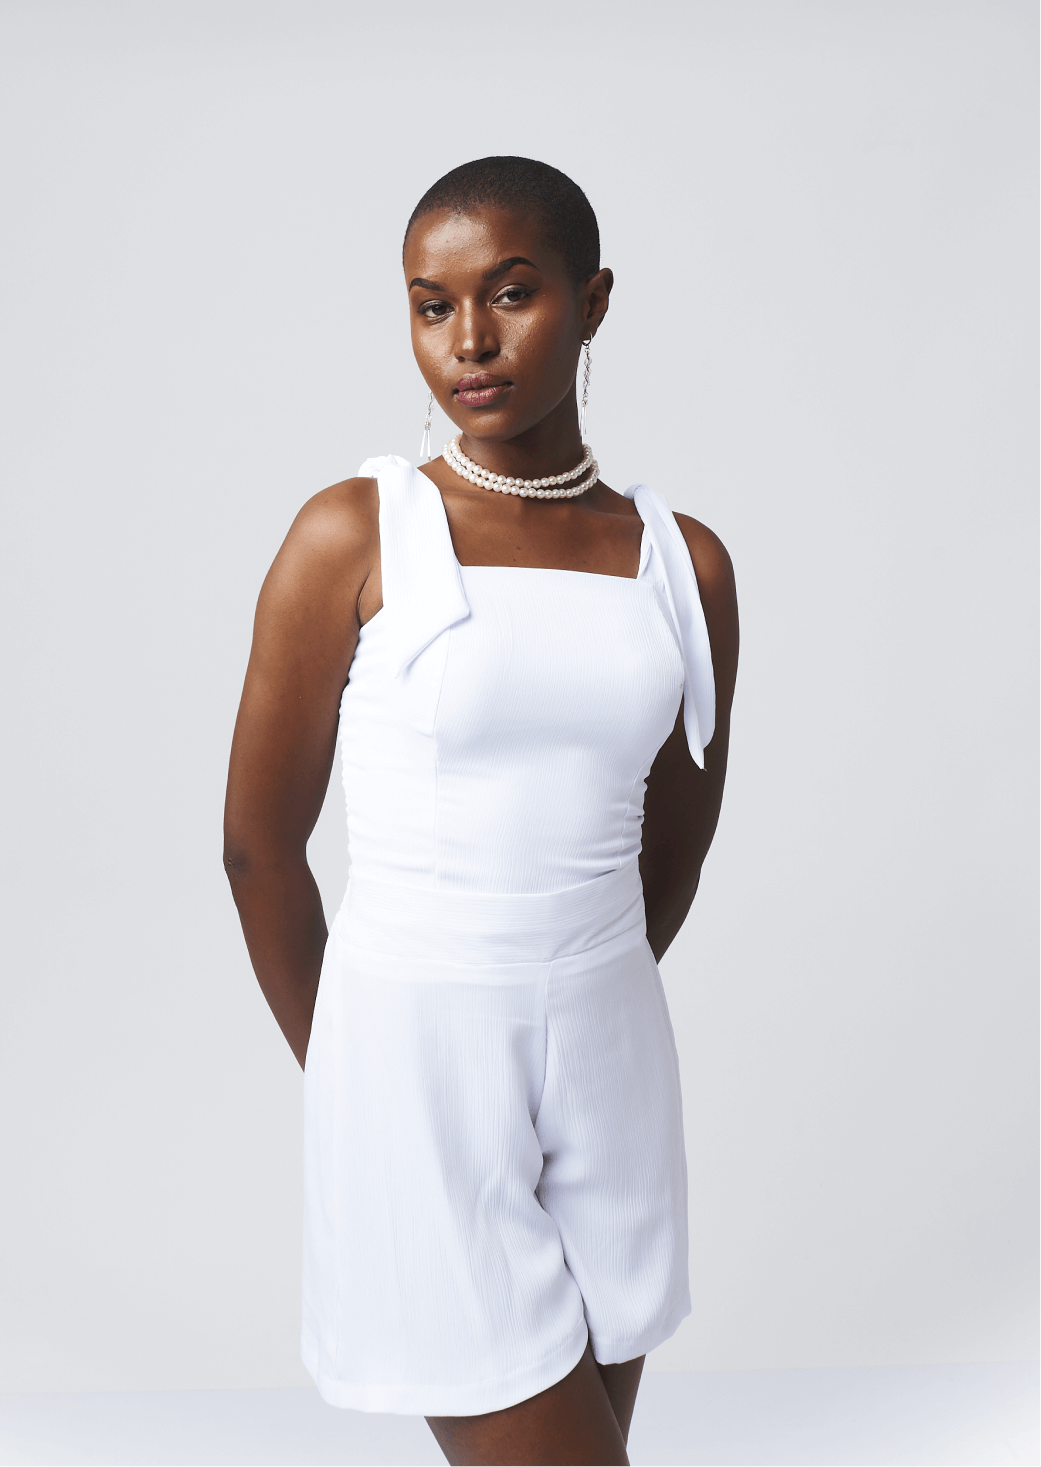 Shop Ribbed Tie Sleeveless Top by Cyami Custom Fit on Arrai. Discover stylish, affordable clothing, jewelry, handbags and unique handmade pieces from top Kenyan & African fashion brands prioritising sustainability and quality craftsmanship.